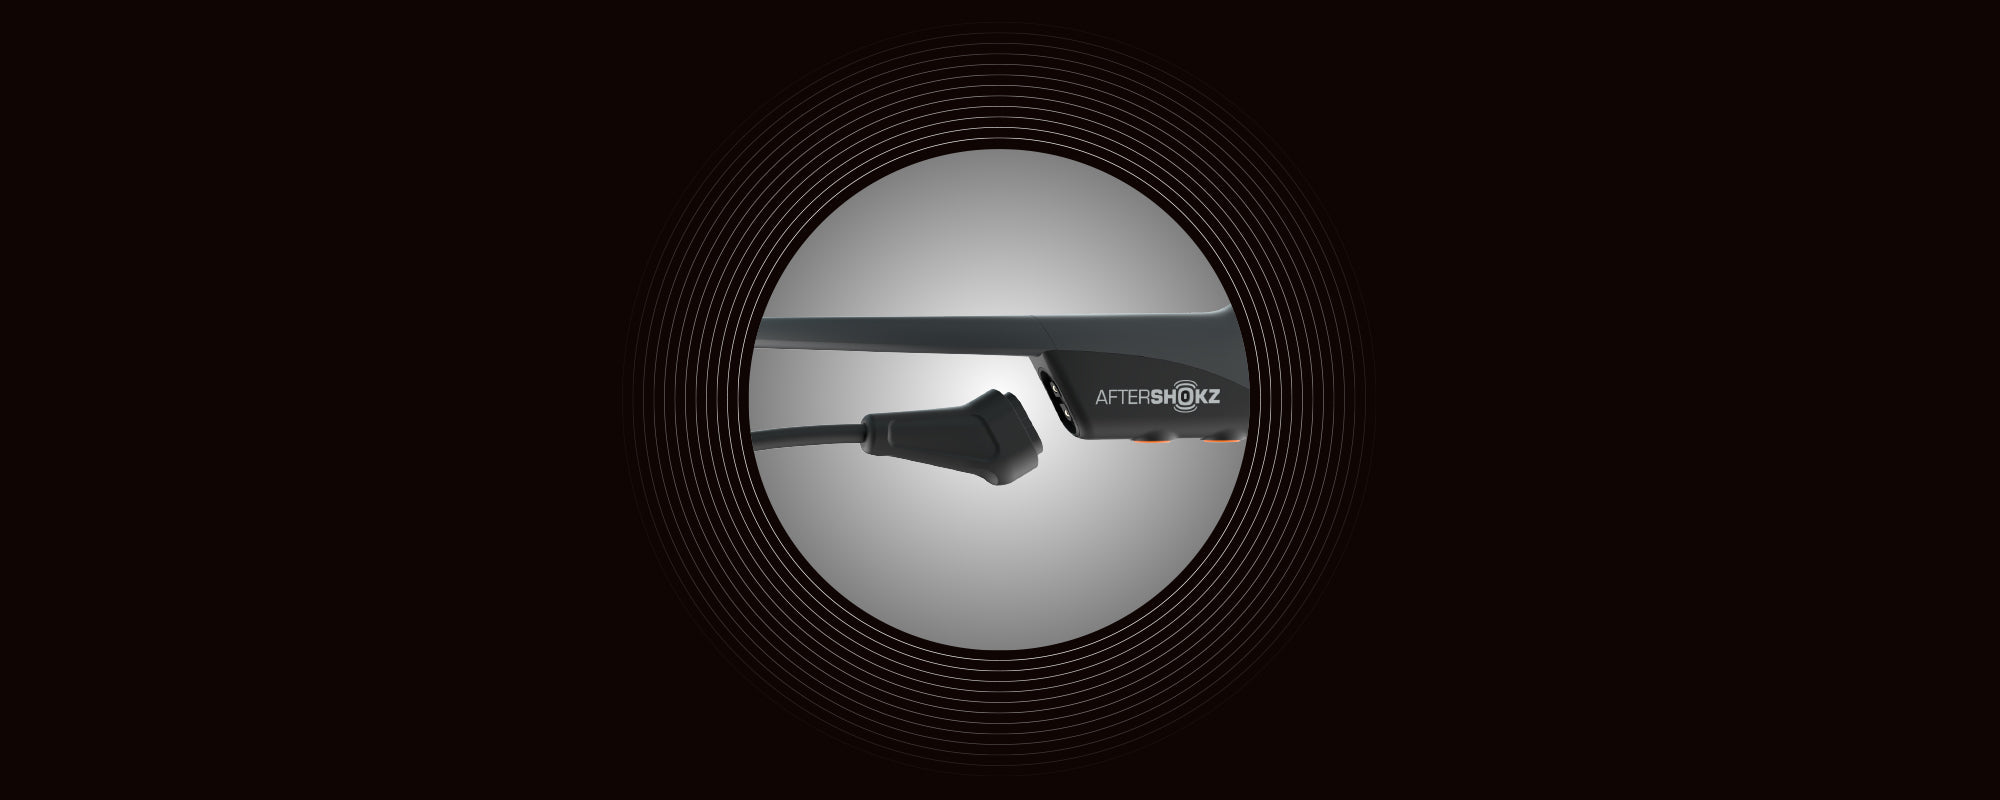 Image of a Magnetic Induction charging port on AfterShokz Aeropex headphones